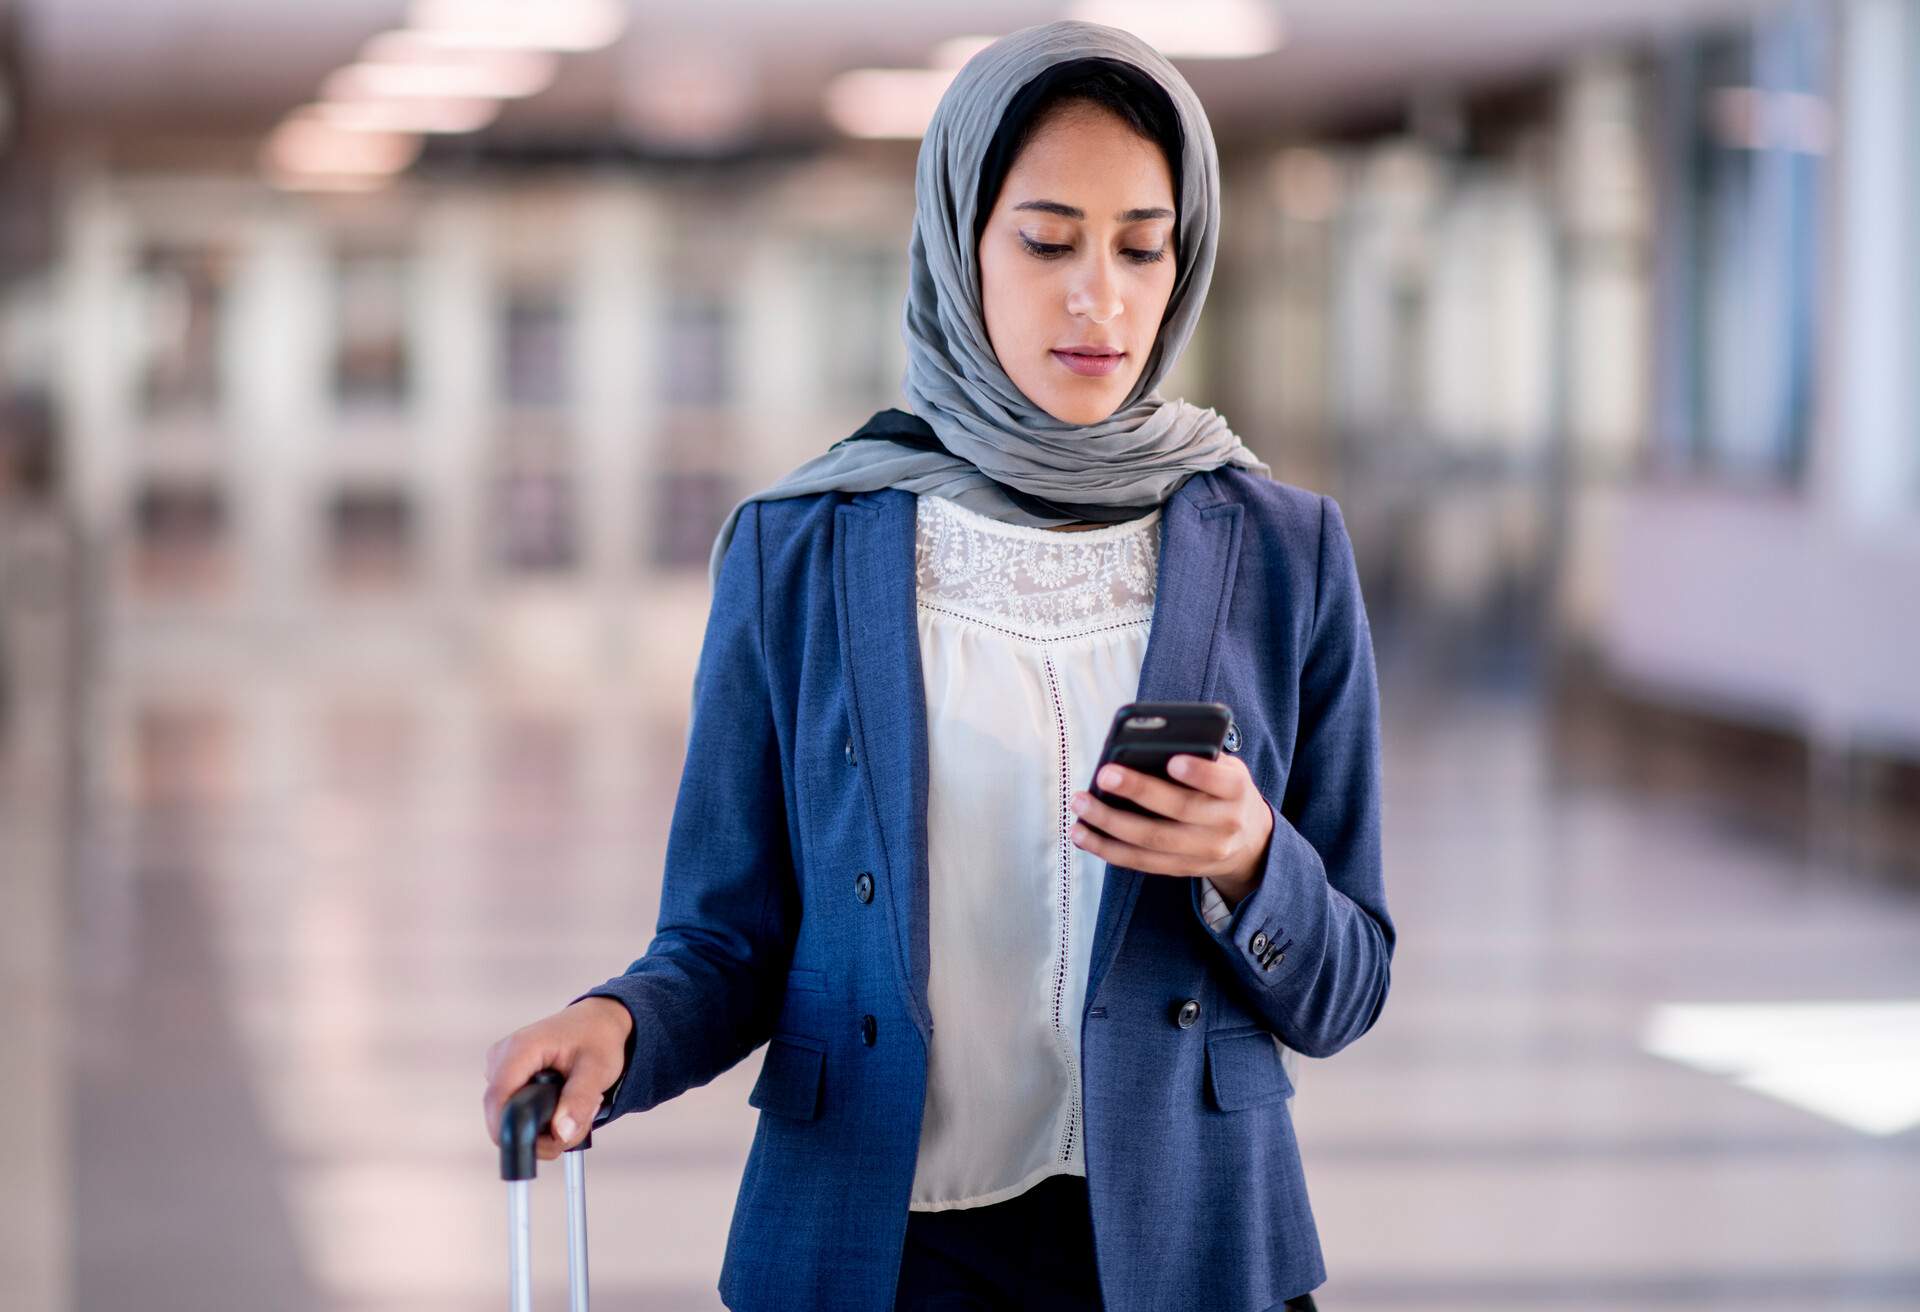 A female wearing hijab looks at her mobile phone while holding a suitcase.